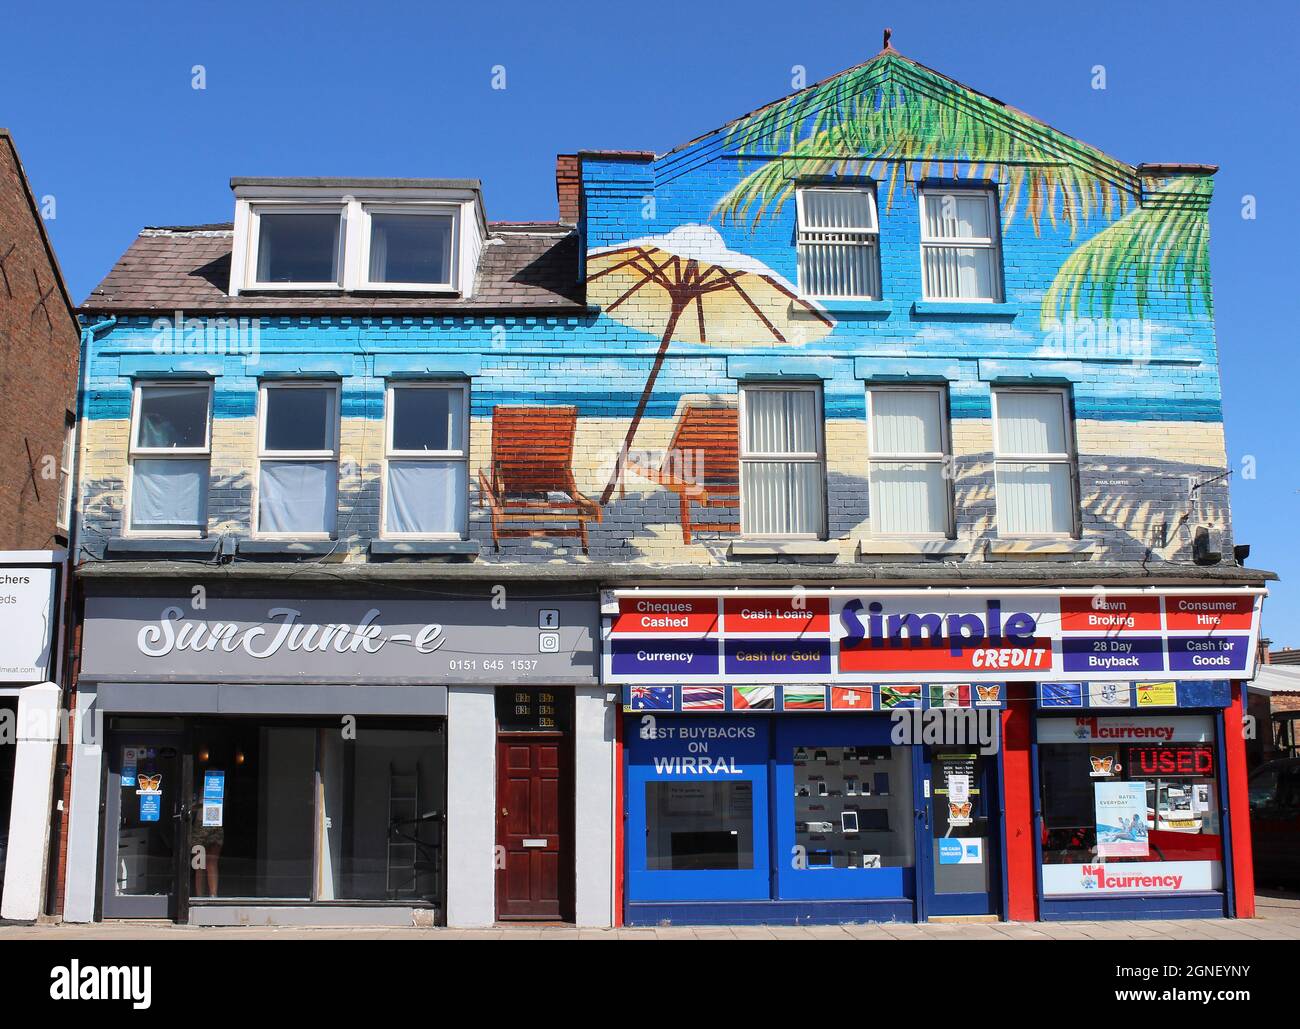 Colourful Beach Art by Paul Curtis Above Sunjunk-E Beauty & Tanning Parlour As Part of A Regeneration Project in New Ferry, Merseyside, UK Stock Photo